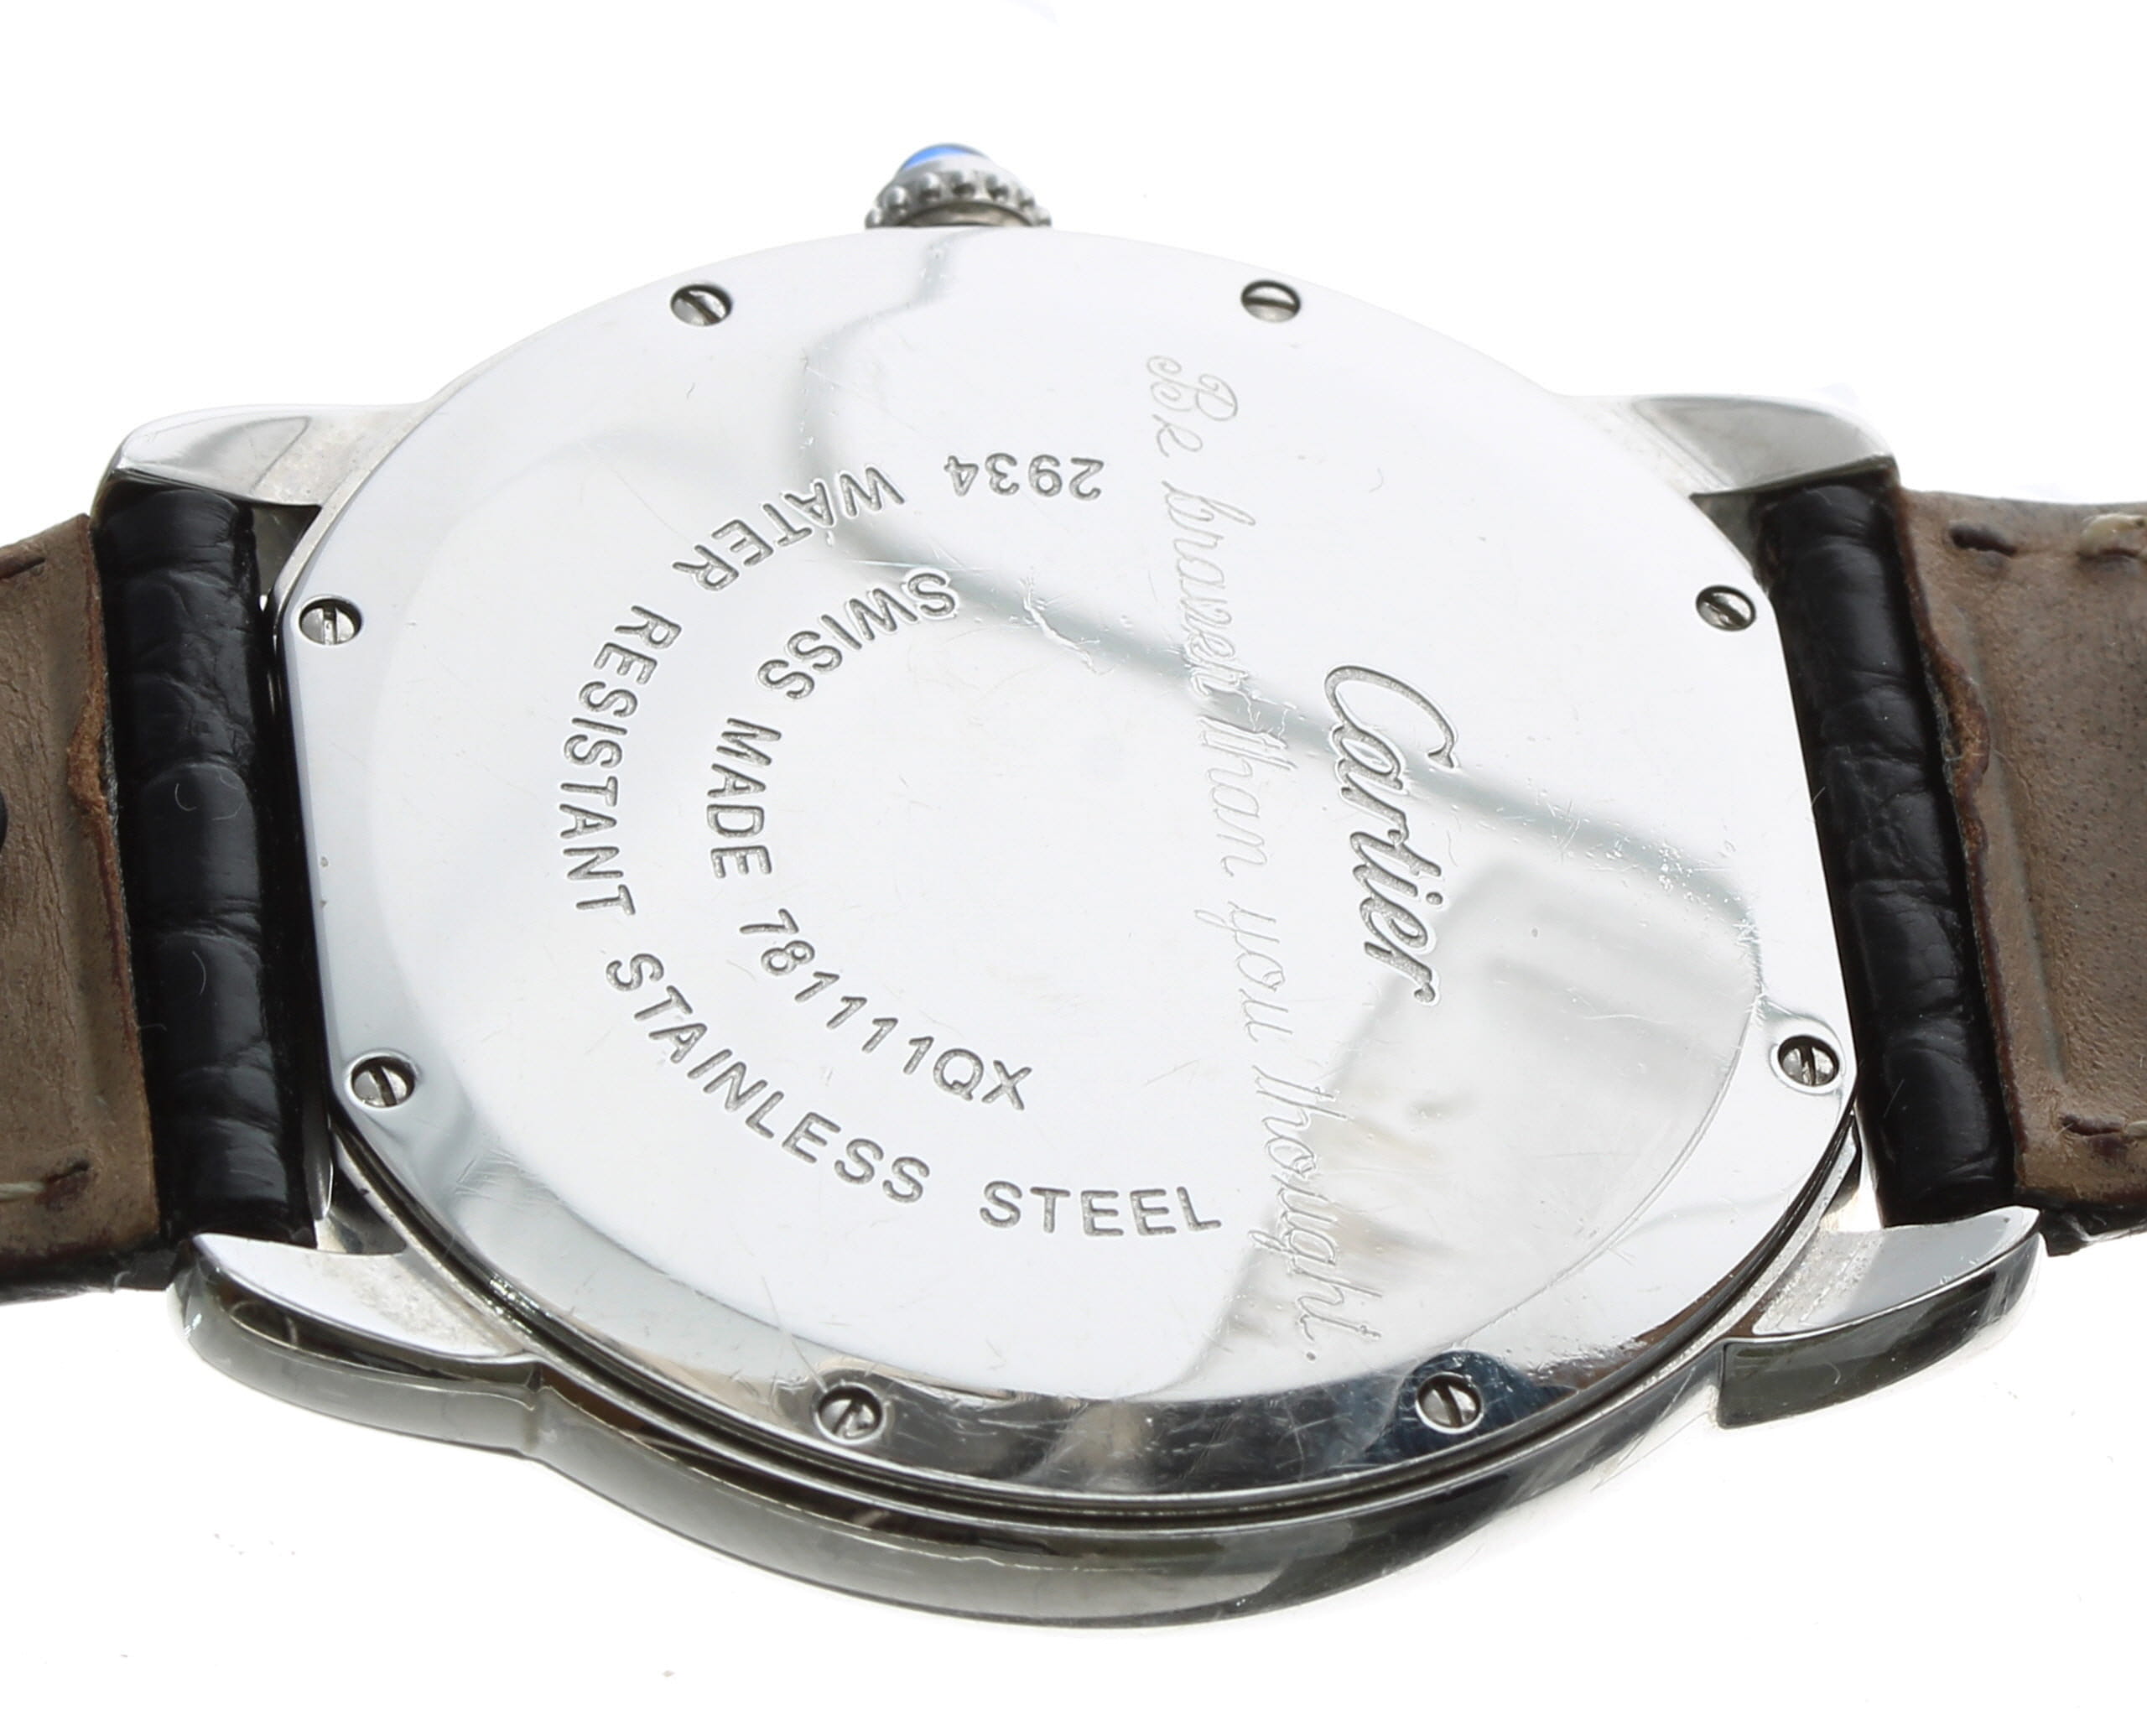 Cartier Ronde Solo stainless steel gentleman’s wristwatch, reference no. 2934, serial no. - Image 2 of 2